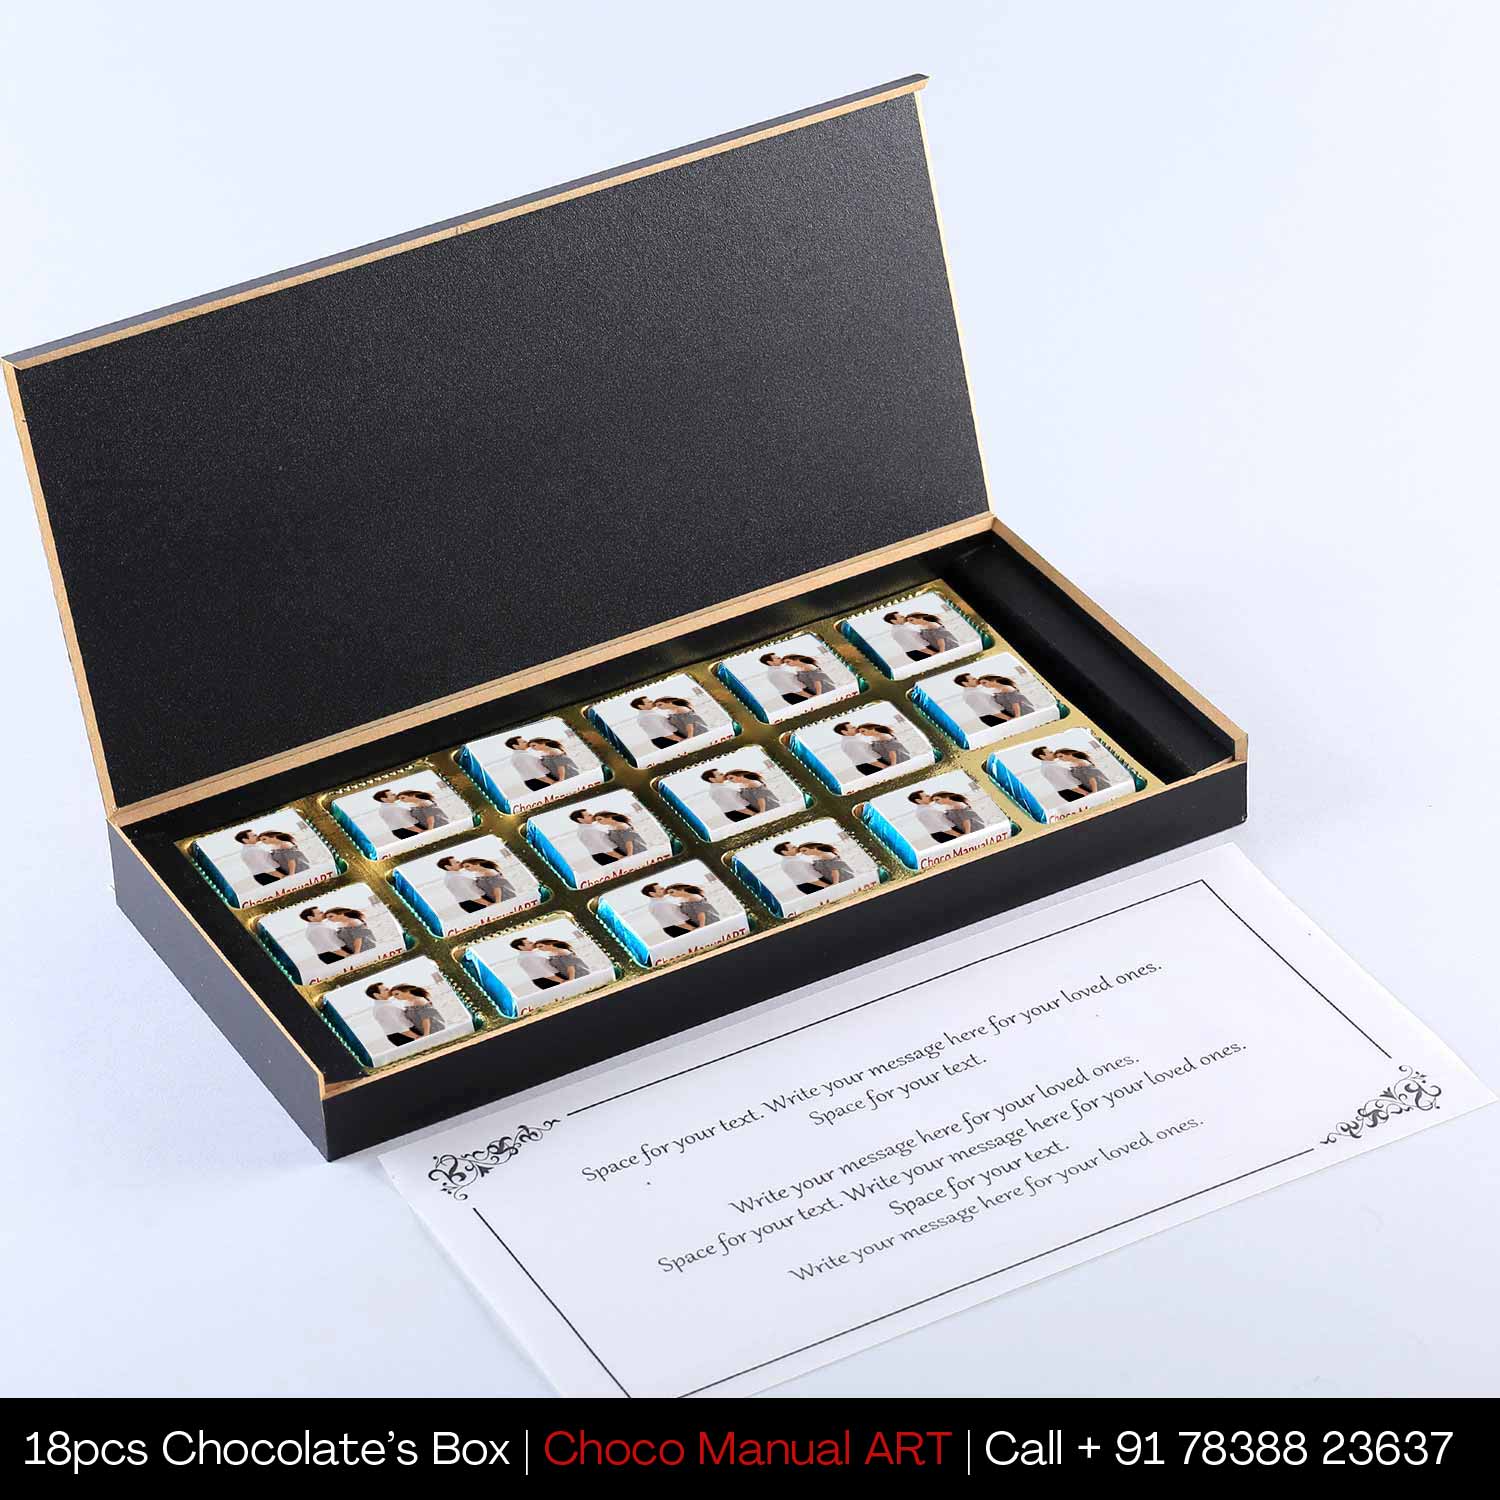 Photo Printed Box of Customised Chocolates with Beautiful Quote